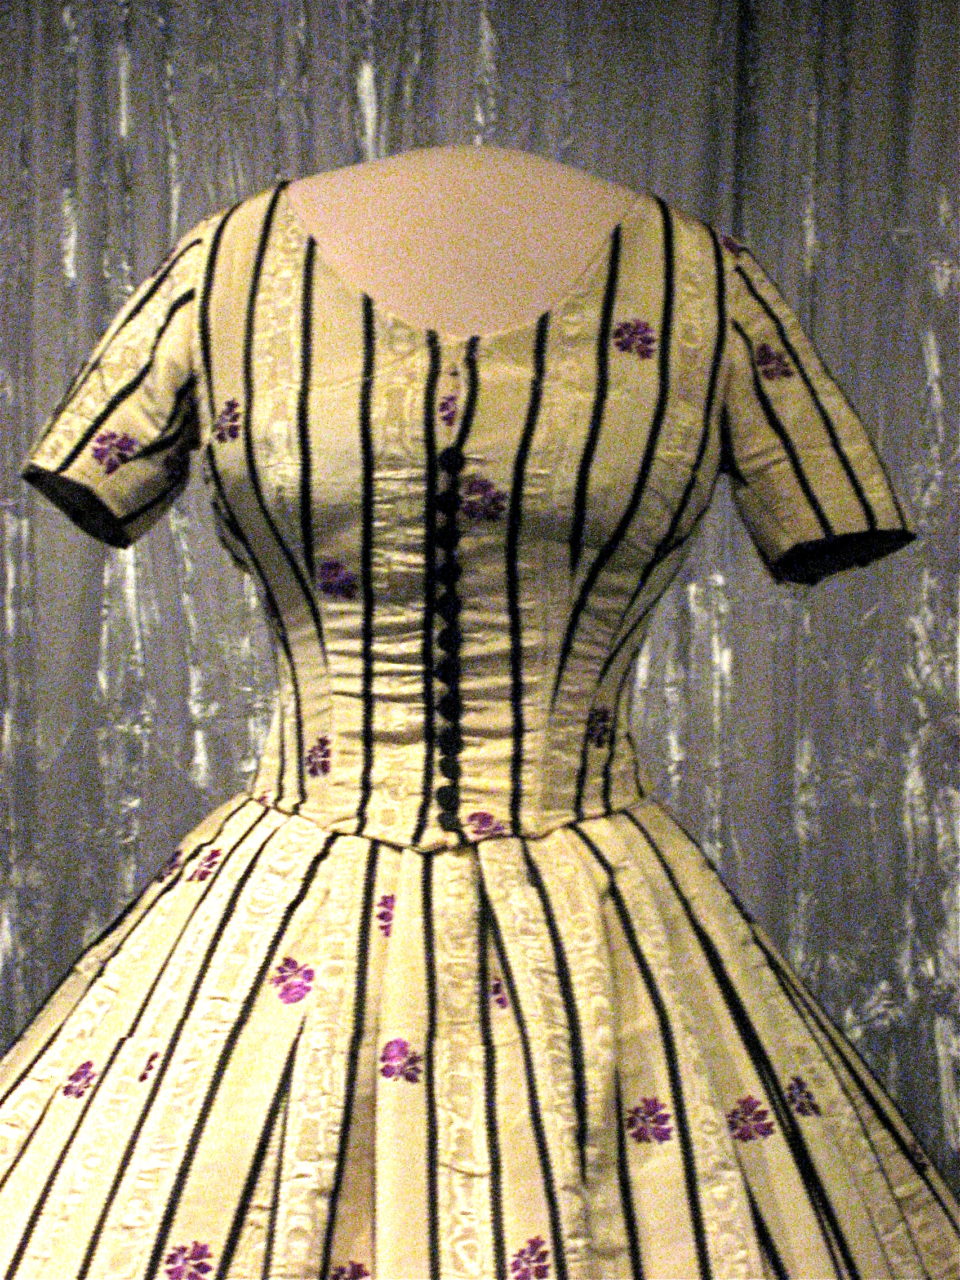 Evening dress for Mary Todd Lincoln